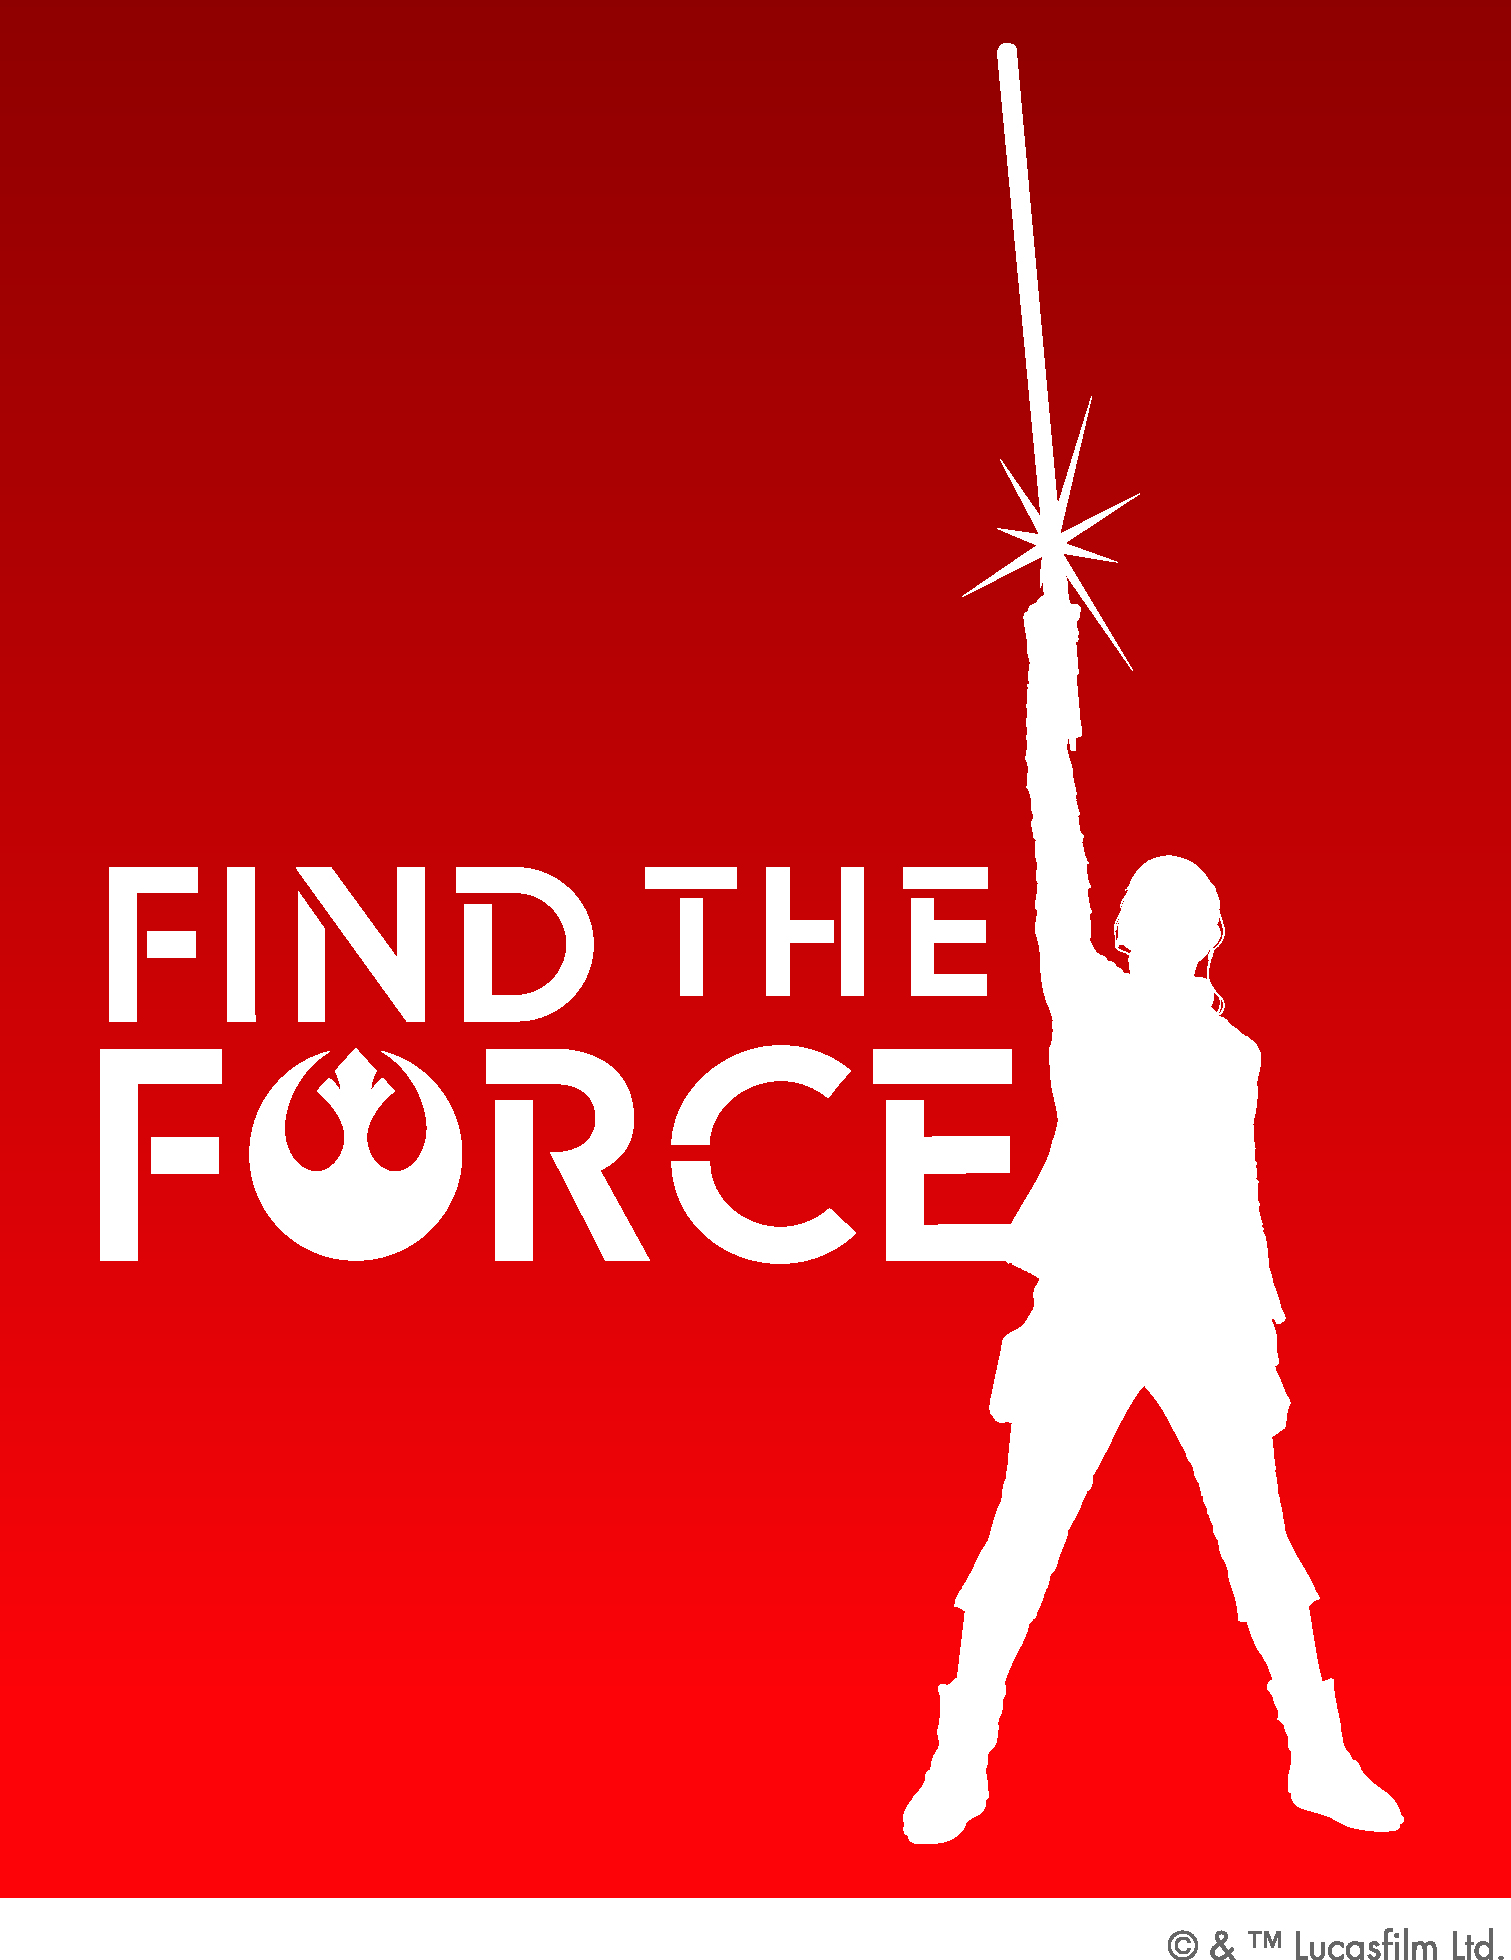 Star Wars Fans Invited to “Find the Force” As Unprecedented Augmented Reality Event Sweeps the Globe for Force Friday II